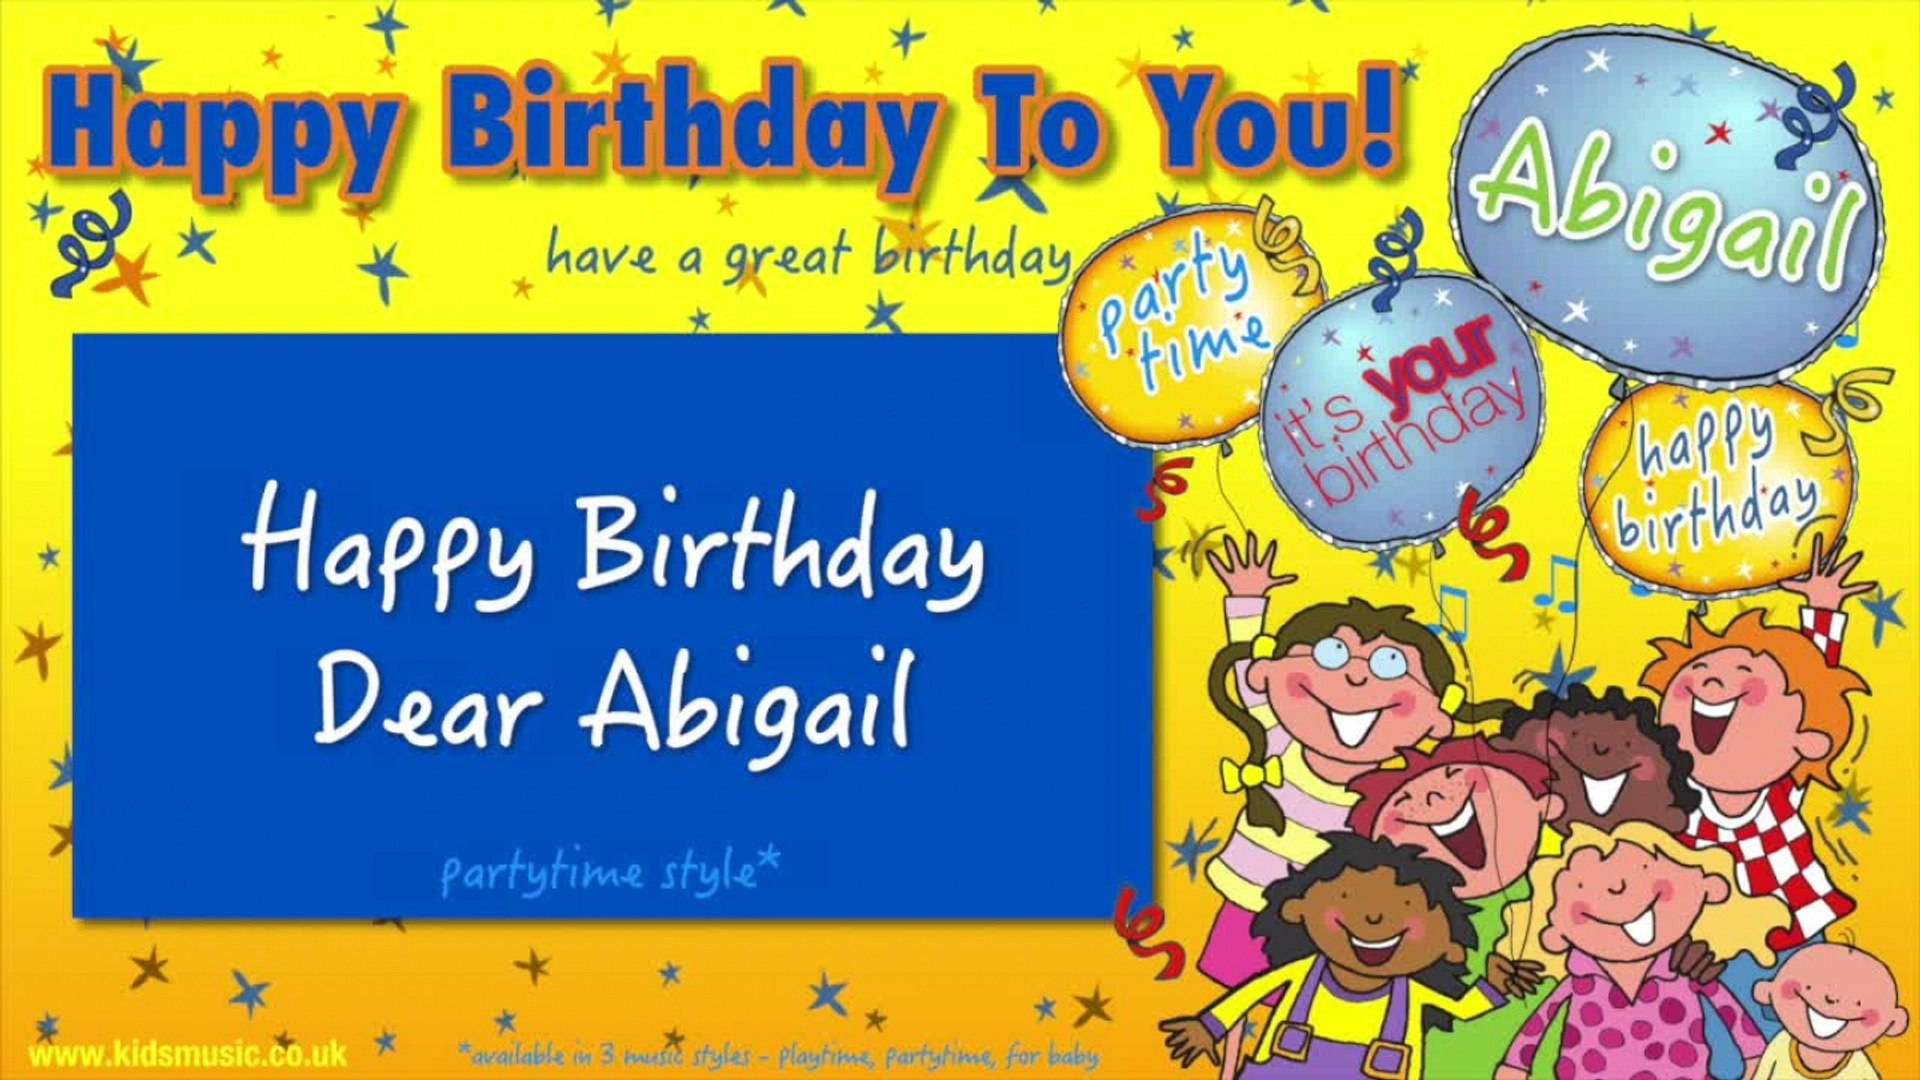 Jump Singers - Happy Birthday Dear Abigail (For Partytime)